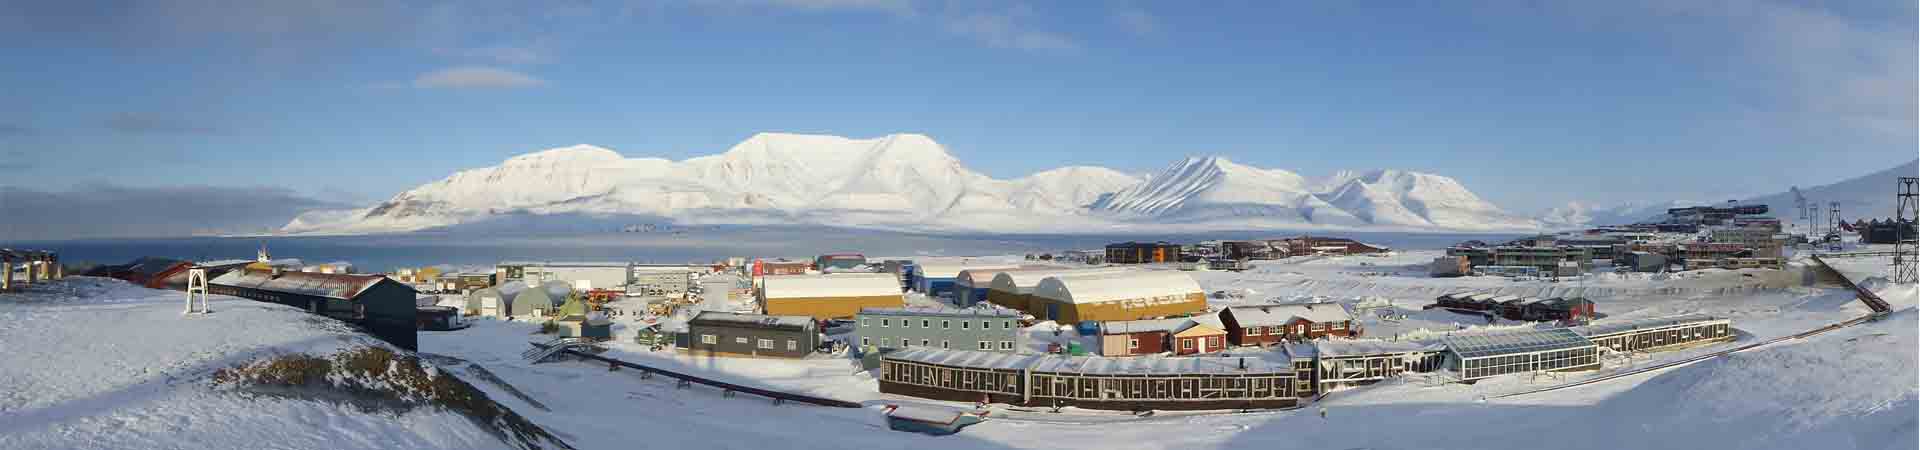 Photo of the Svalbard town of Longyearbyen where the students stay